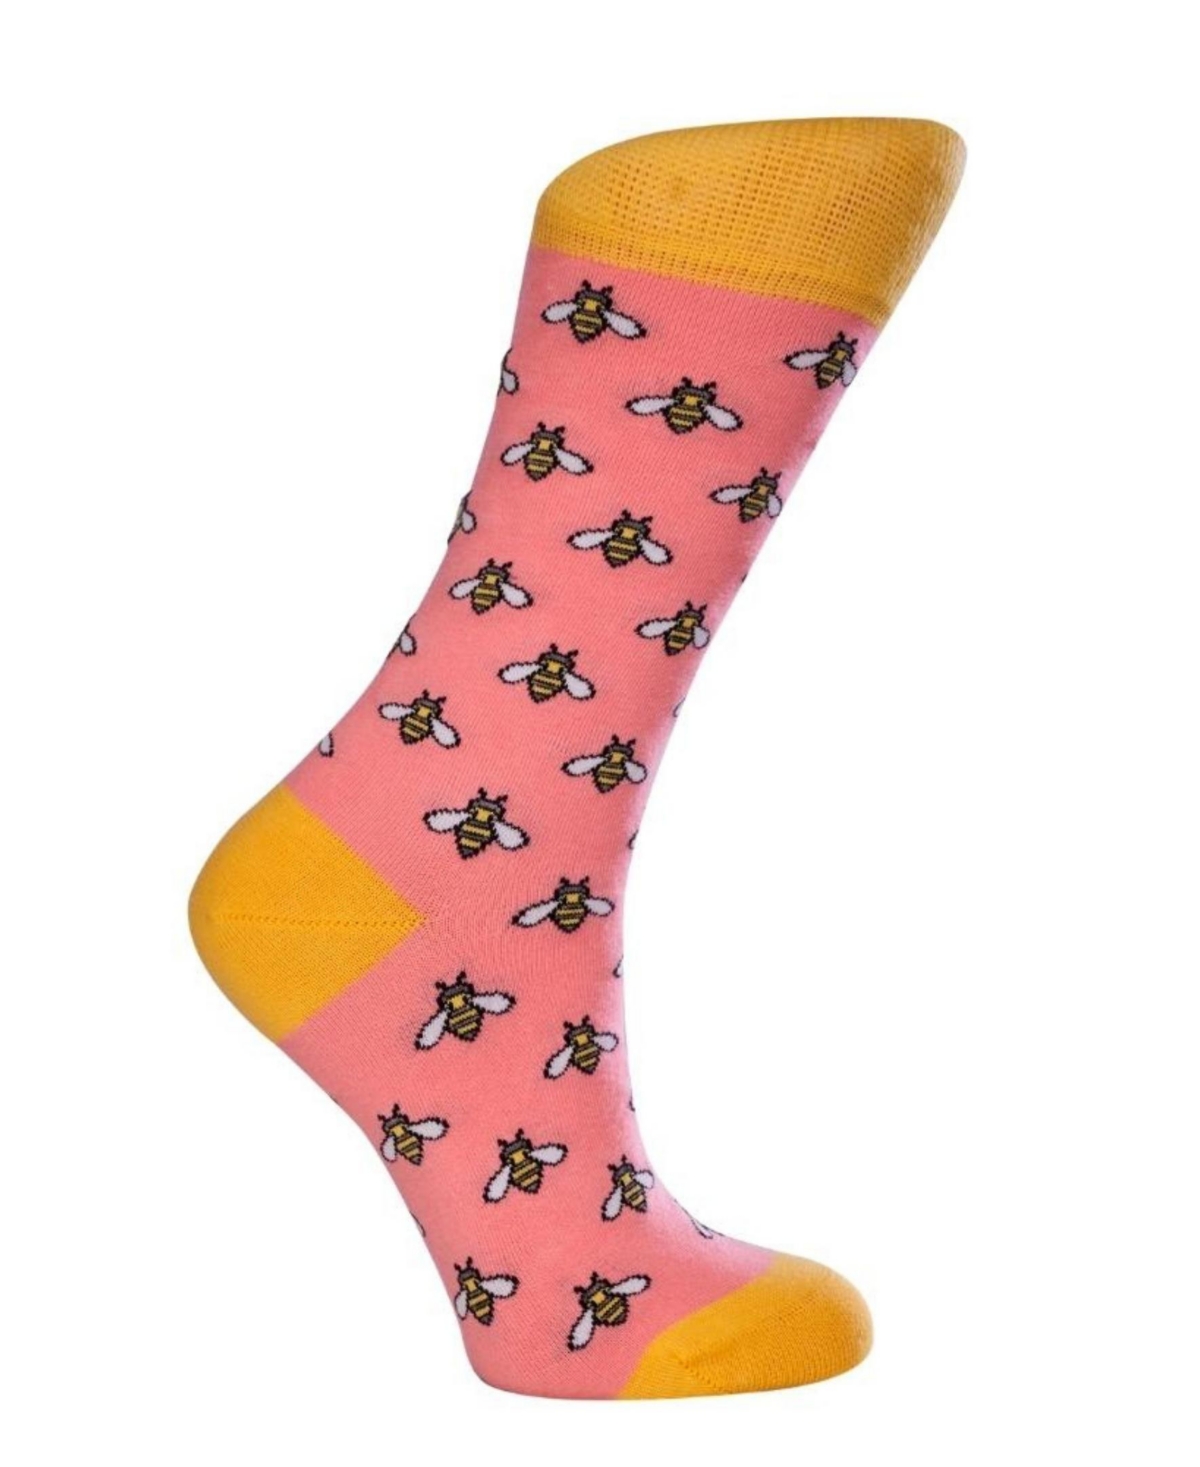 Women's Bee W-Cotton Novelty Crew Socks with Seamless Toe Design, Pack of 1 - Pink